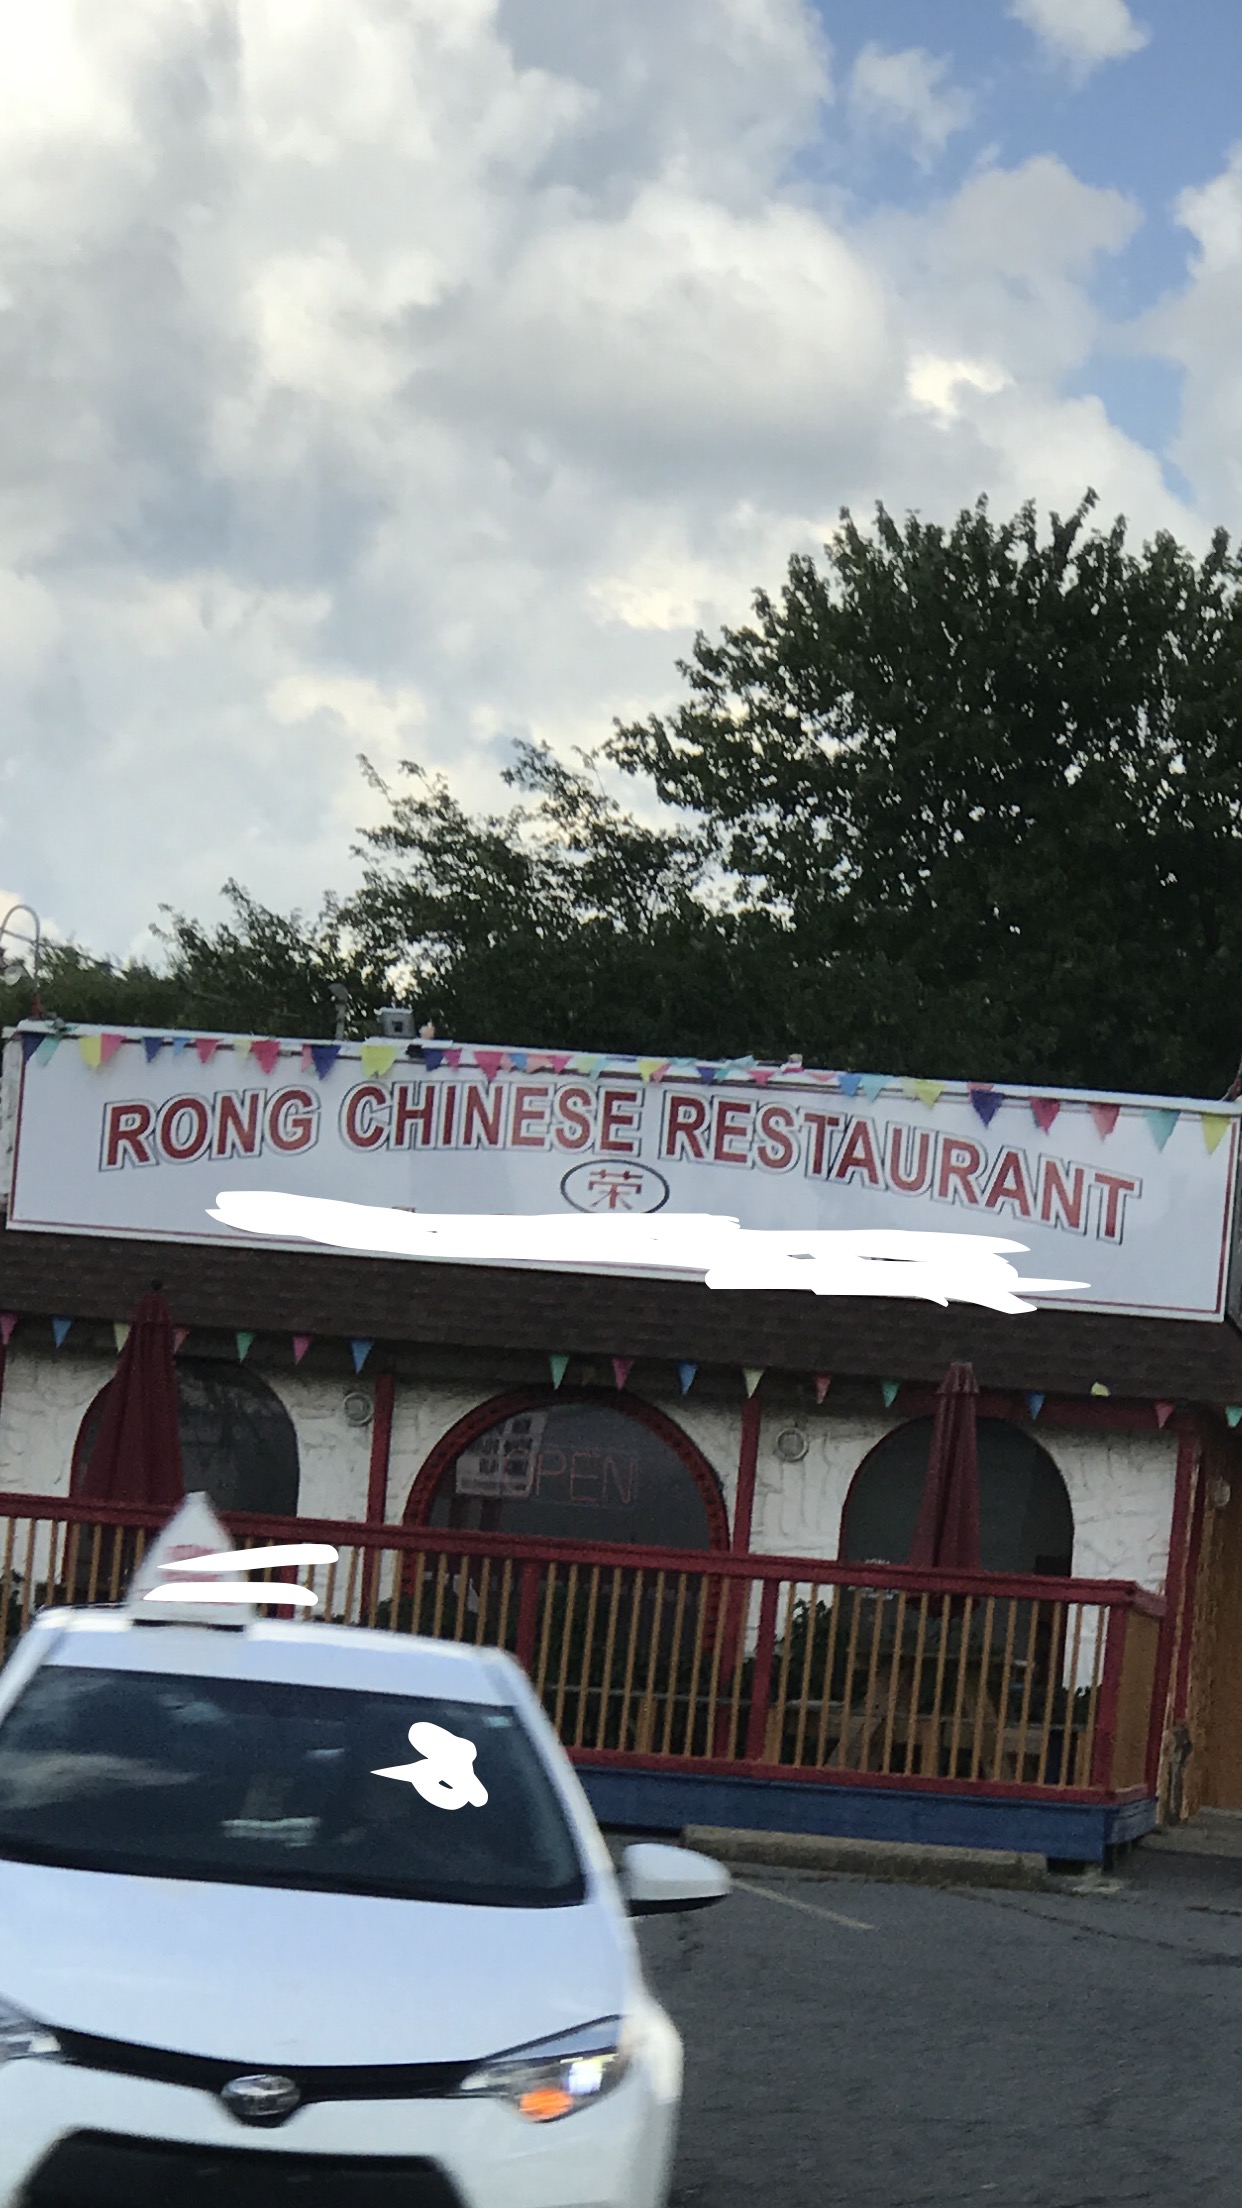 Funny name for Rong Chinese Restaurant